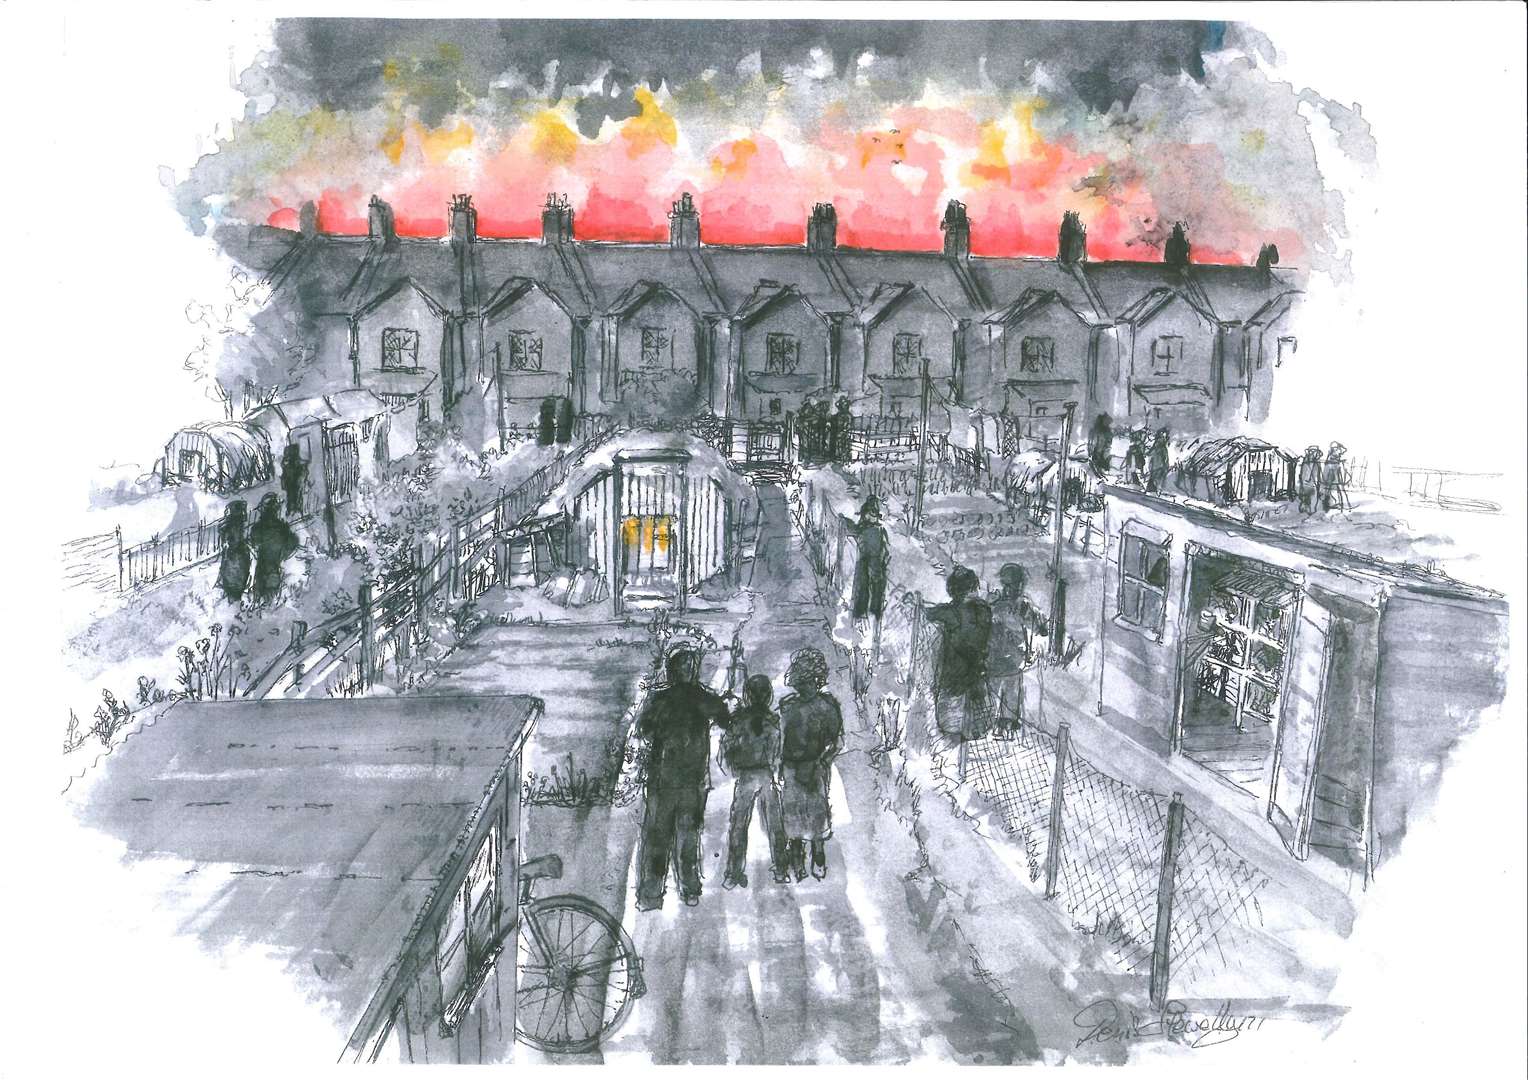 People watching the fire burning in London in a painting by Denis Llewellyn